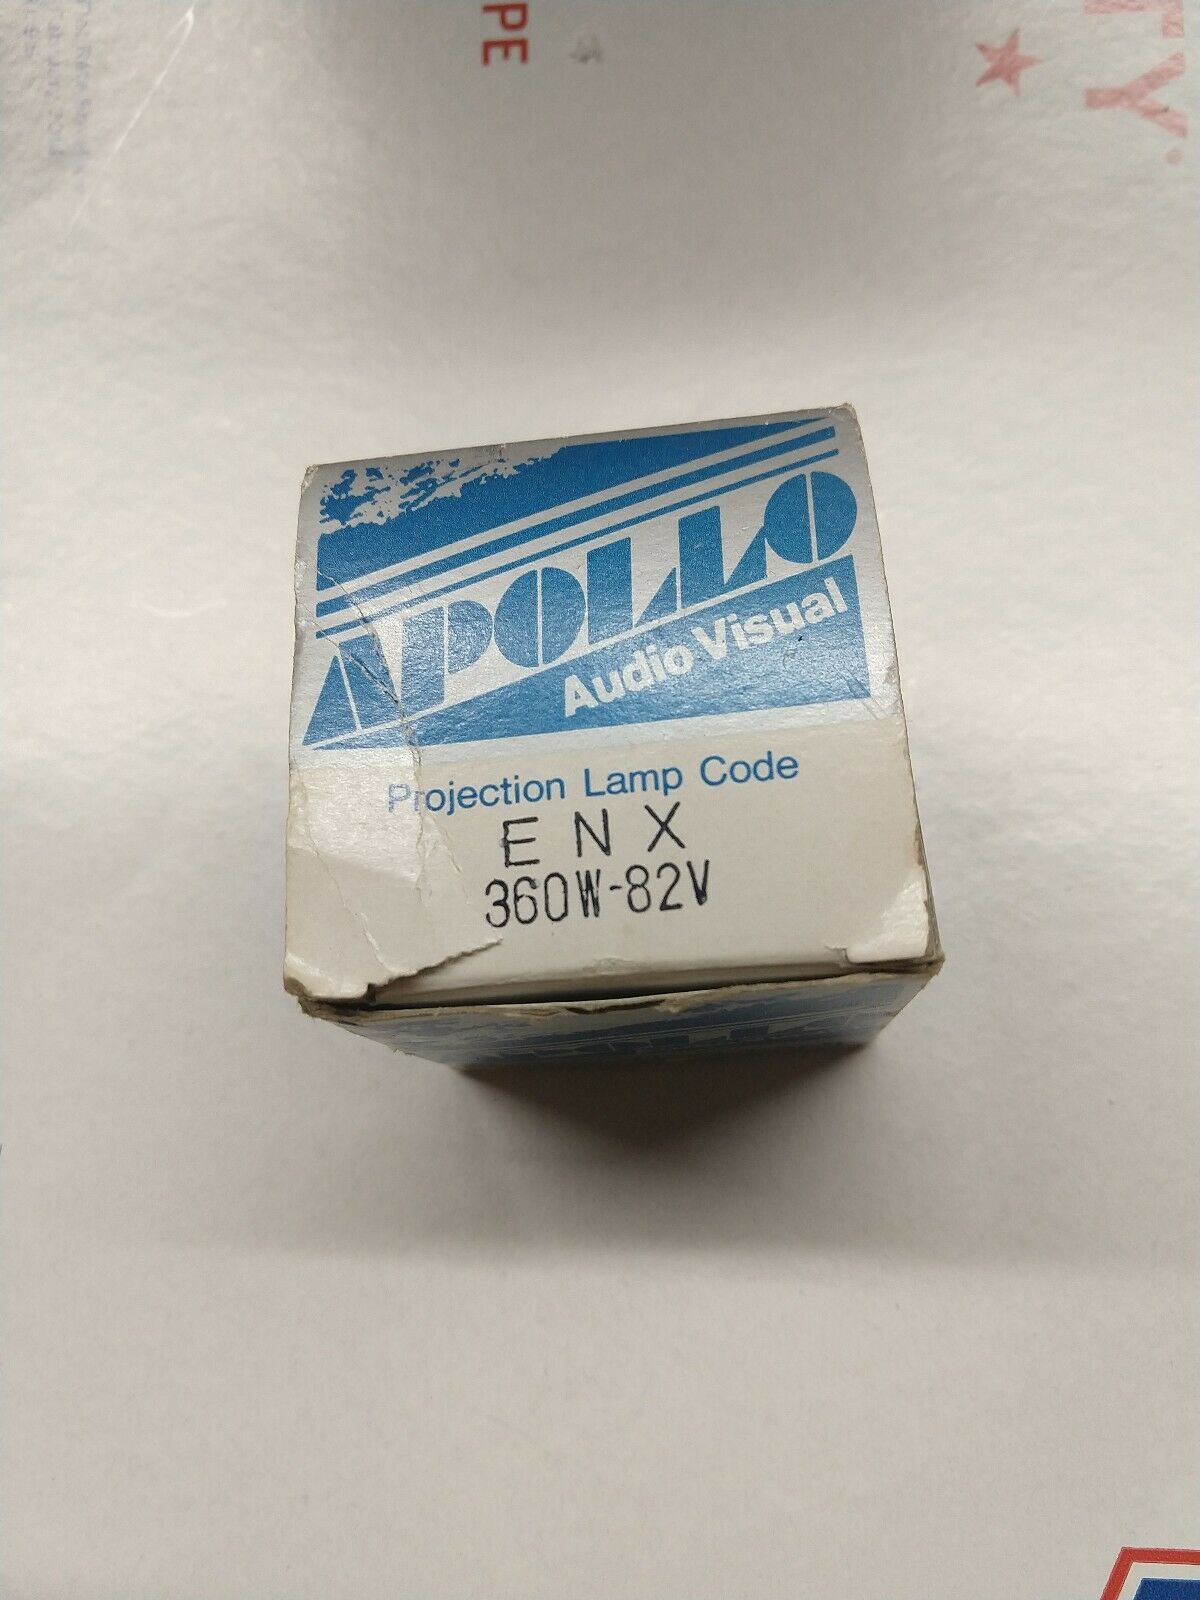 Apollo Enx 360w 82v Projection Lamp Projector Bulb, Made In Japan Check